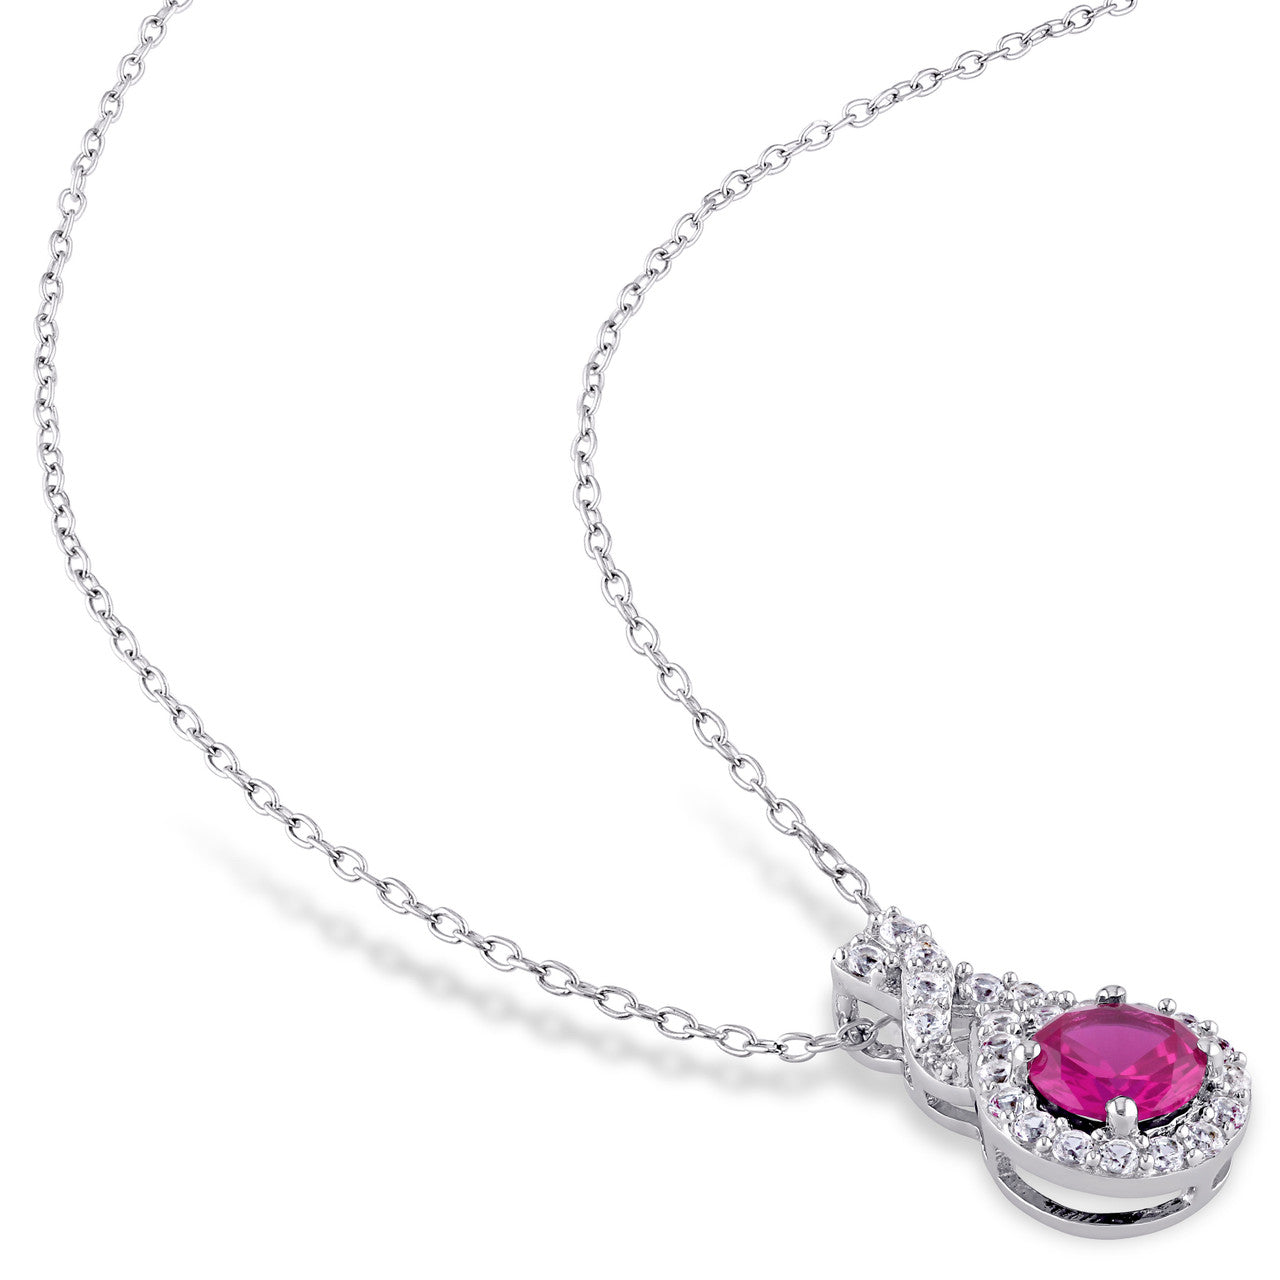 Ice Jewellery 1 4/5 CT TGW Created White Sapphire Created Ruby Fashion Pendant With Chain in Sterling Silver - 75000004877 | Ice Jewellery Australia